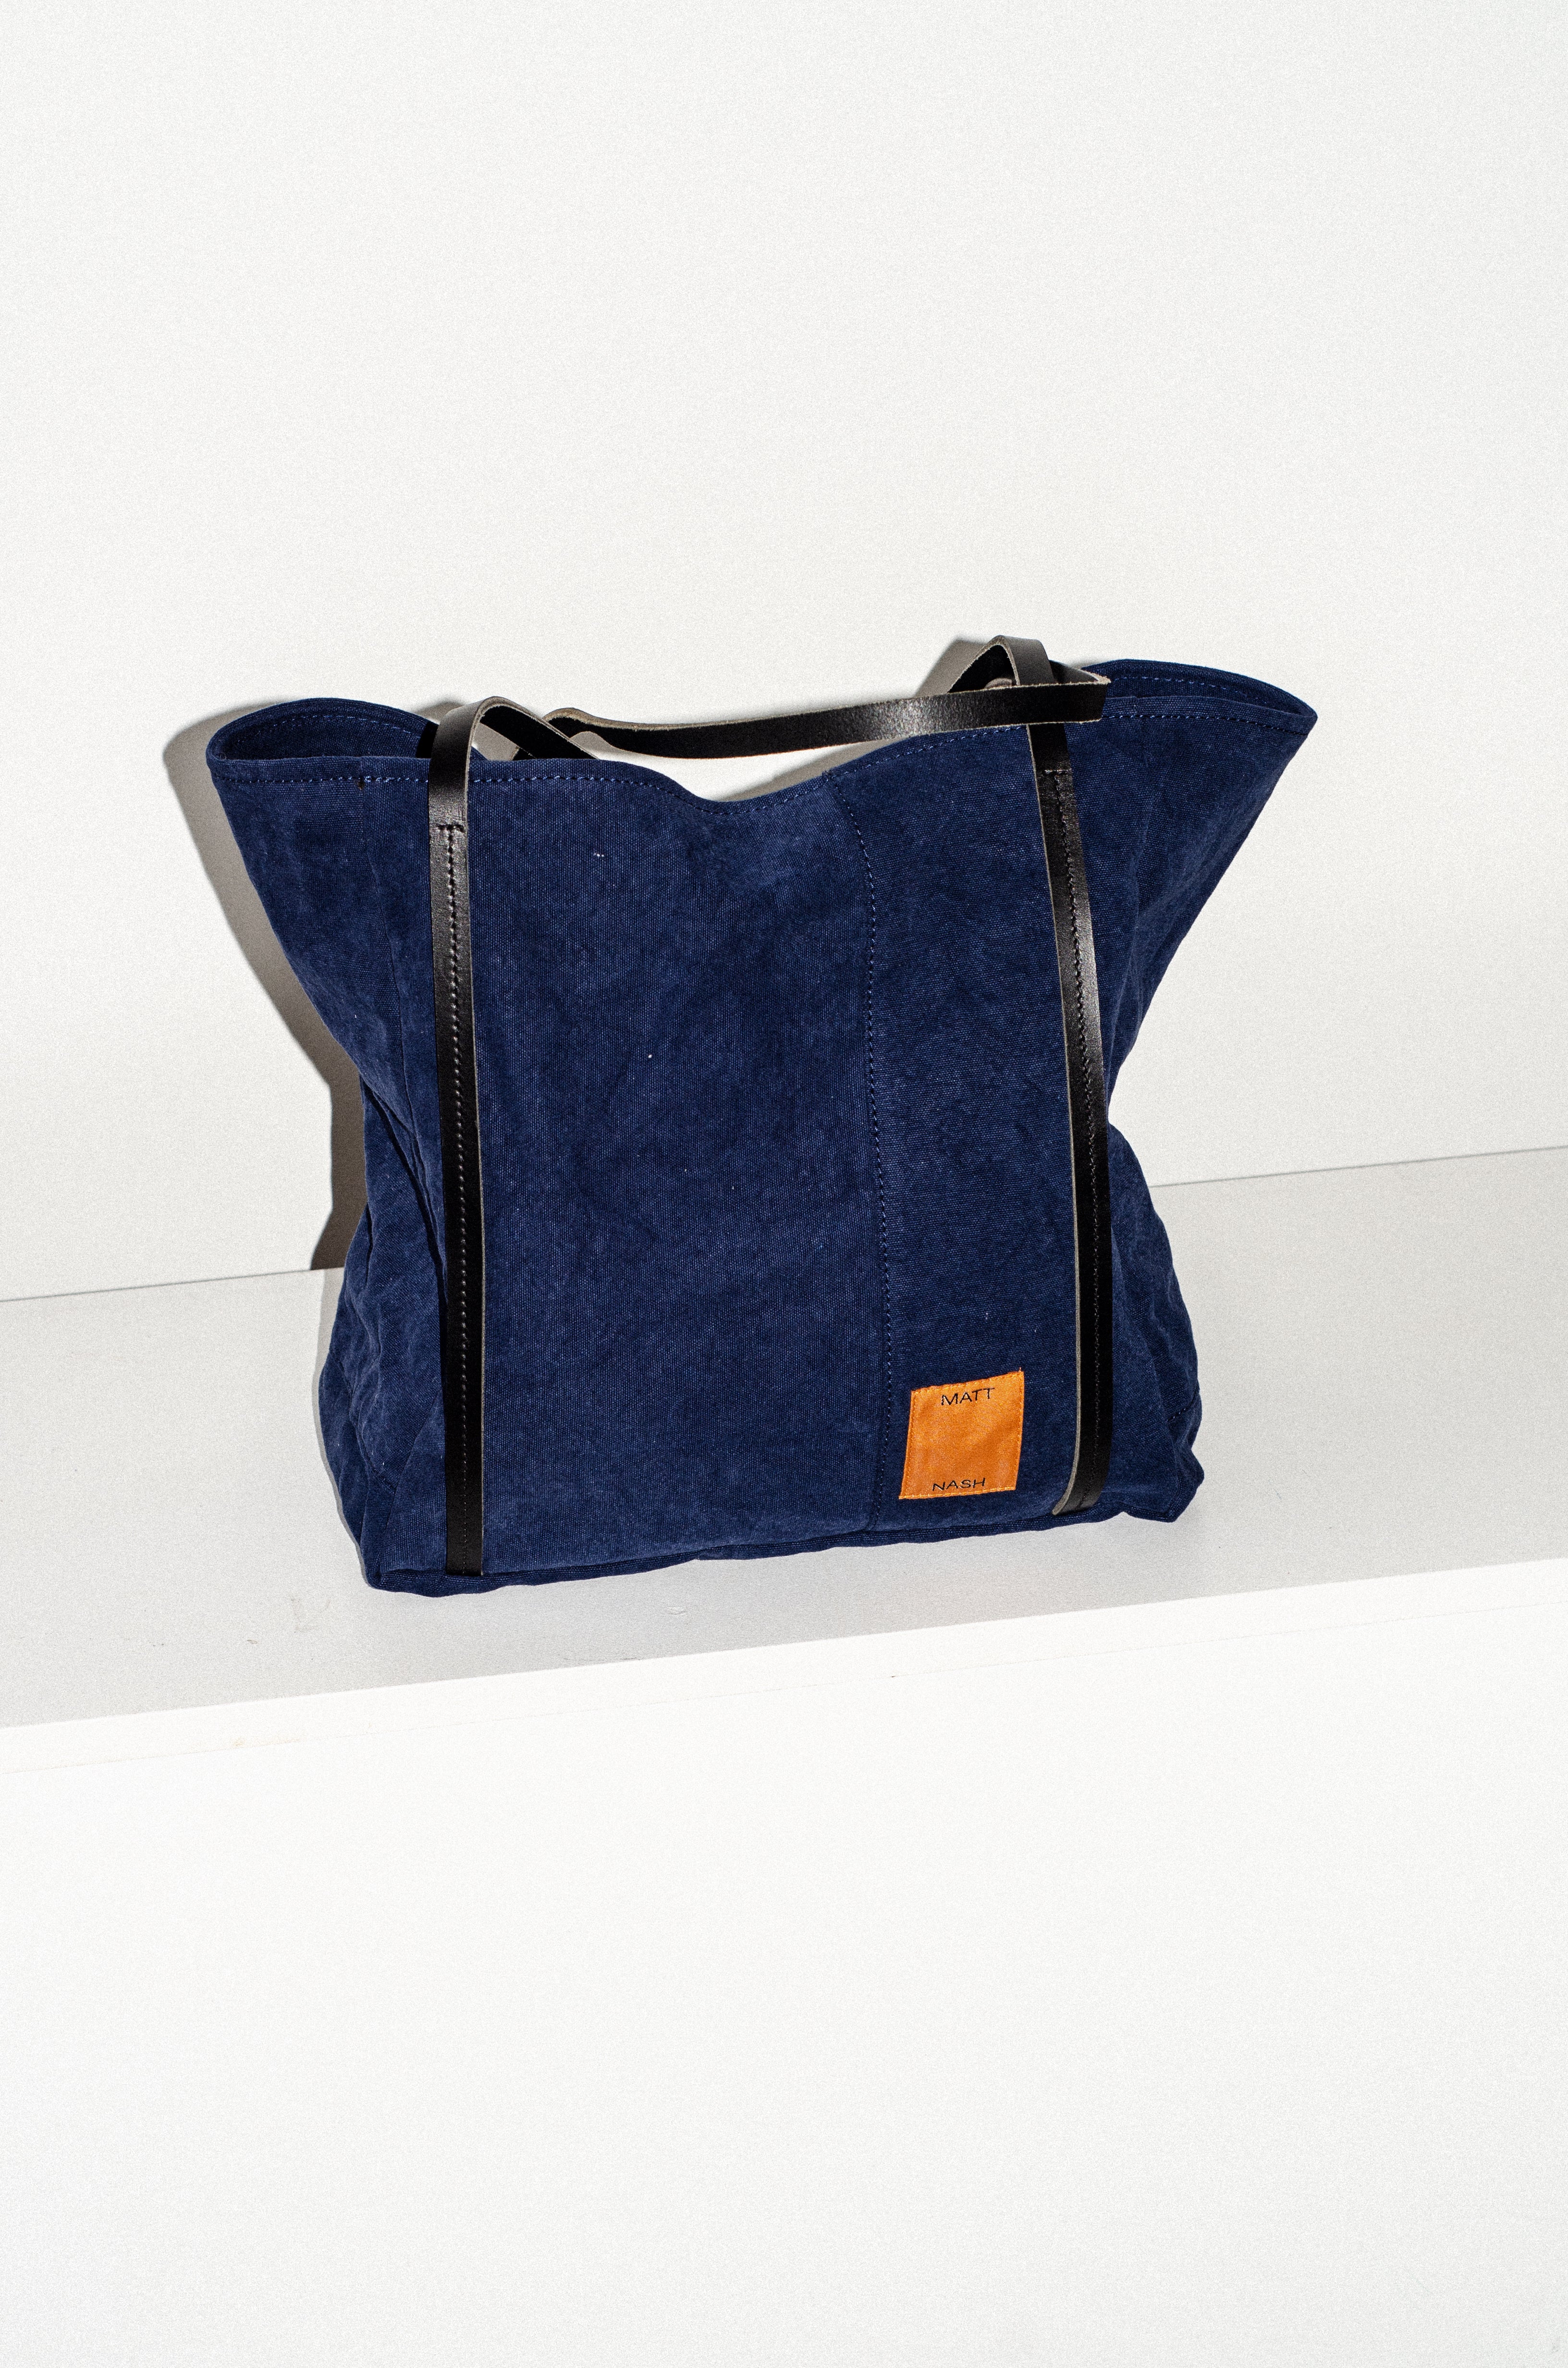 RELY screen-printed tote with leather straps